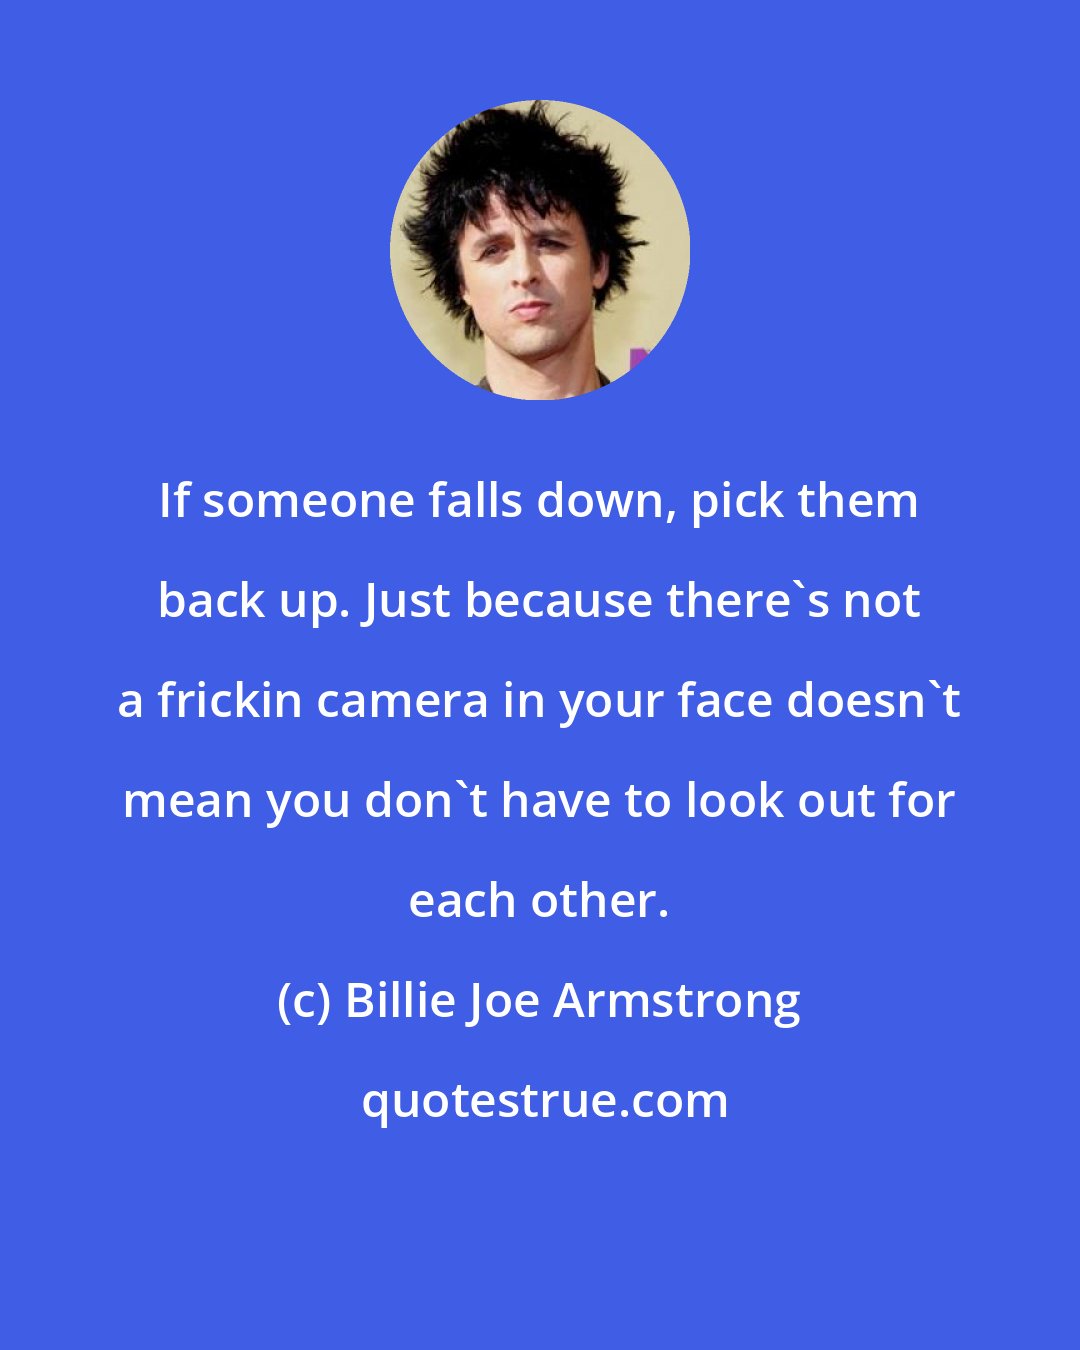 Billie Joe Armstrong: If someone falls down, pick them back up. Just because there's not a frickin camera in your face doesn't mean you don't have to look out for each other.